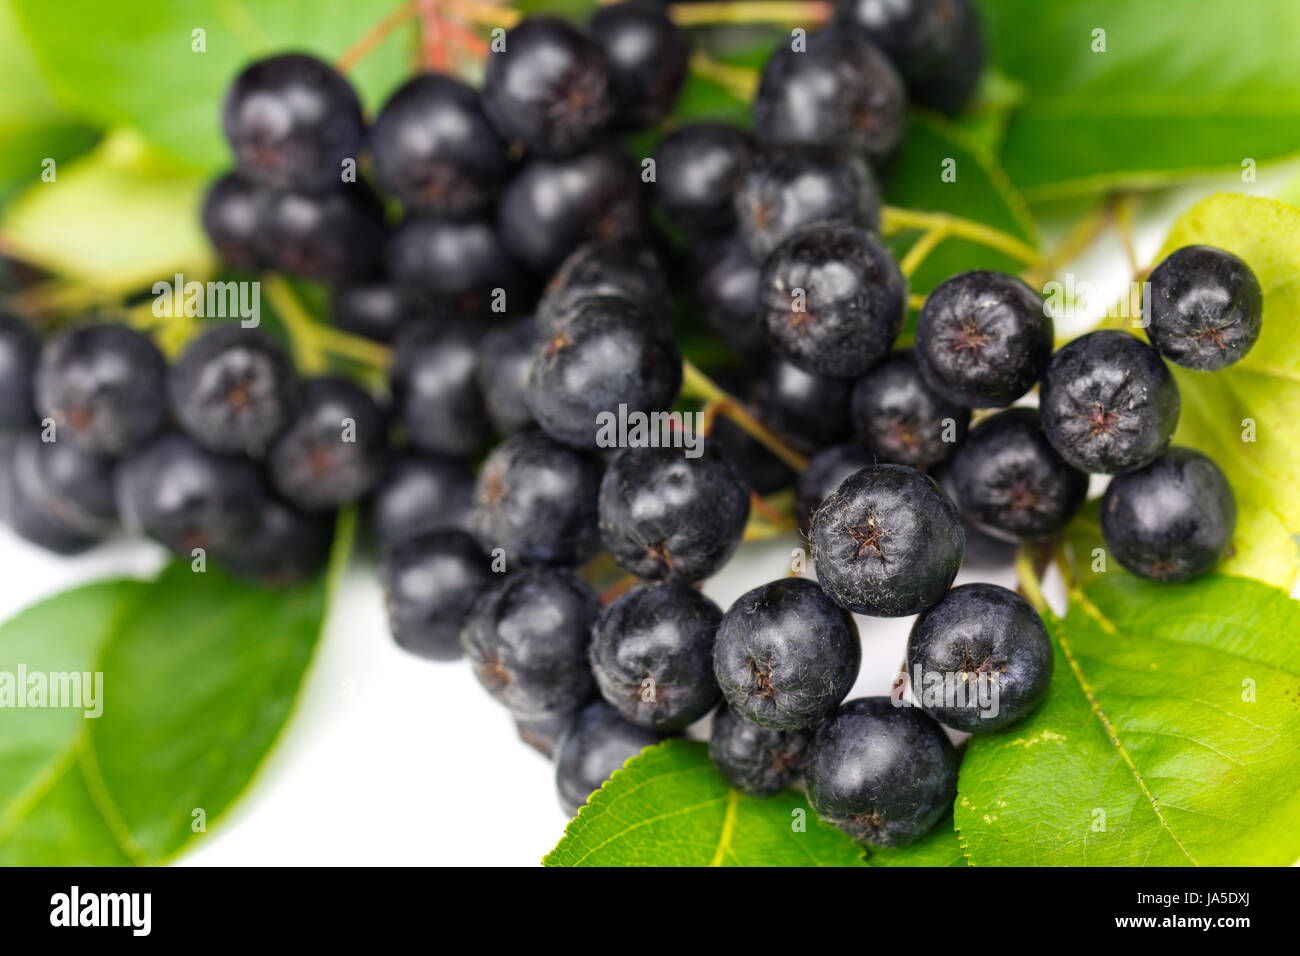 vitamine, sweetly, tree, green, agriculture, farming, ripe, cold, catarrh, Stock Photo